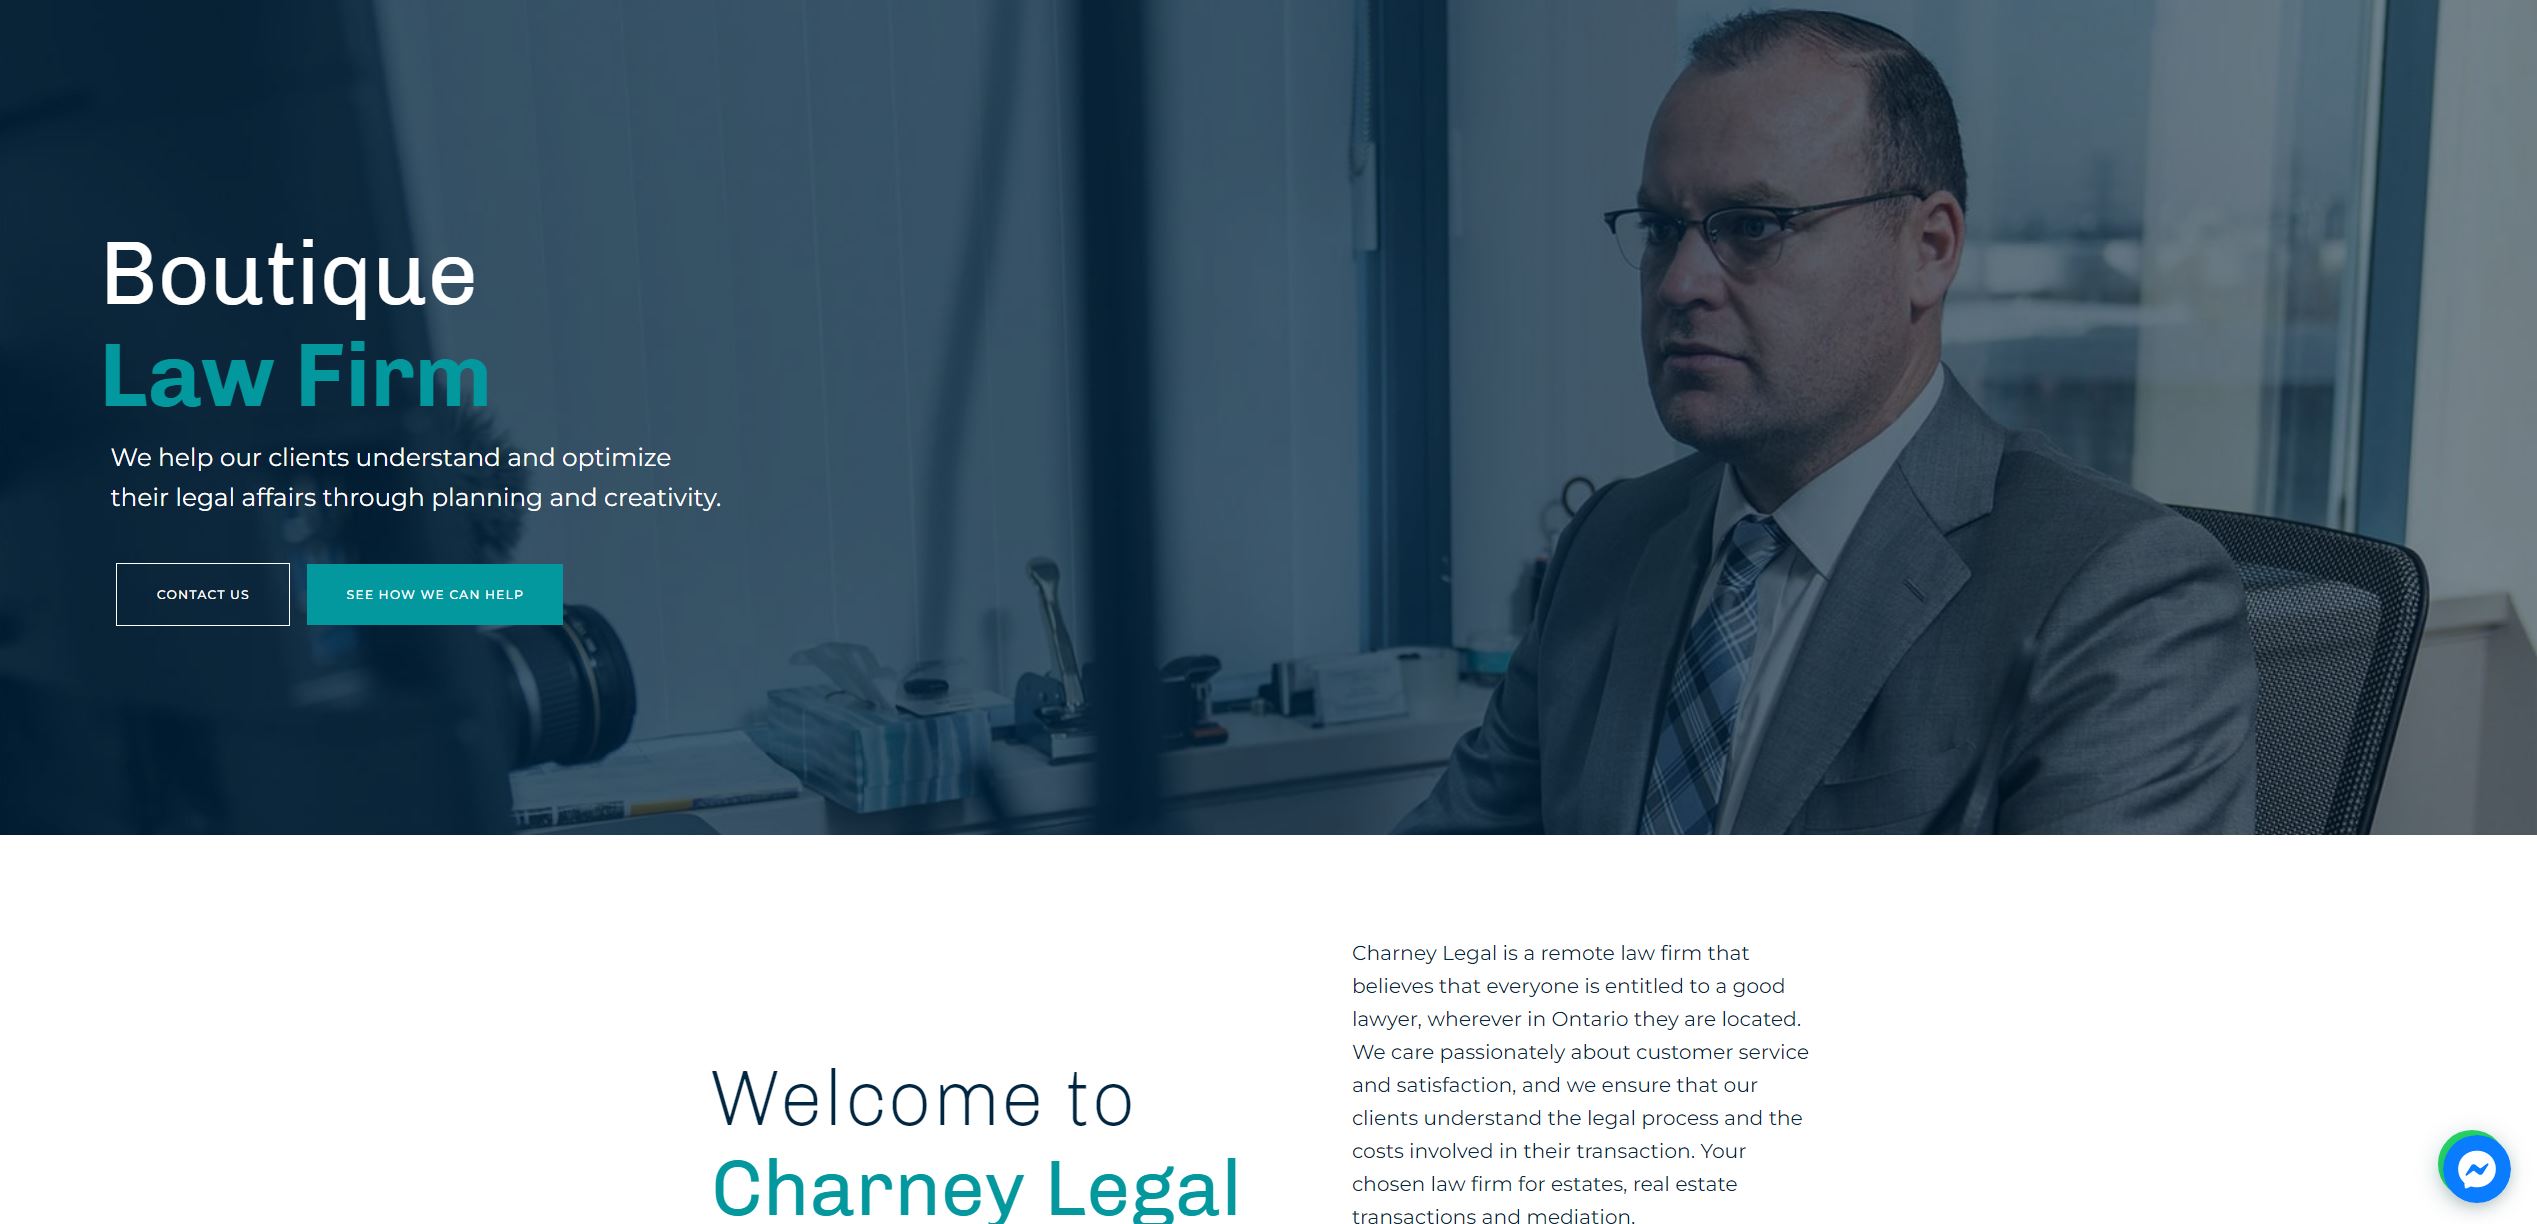 Charney Legal Law Firm